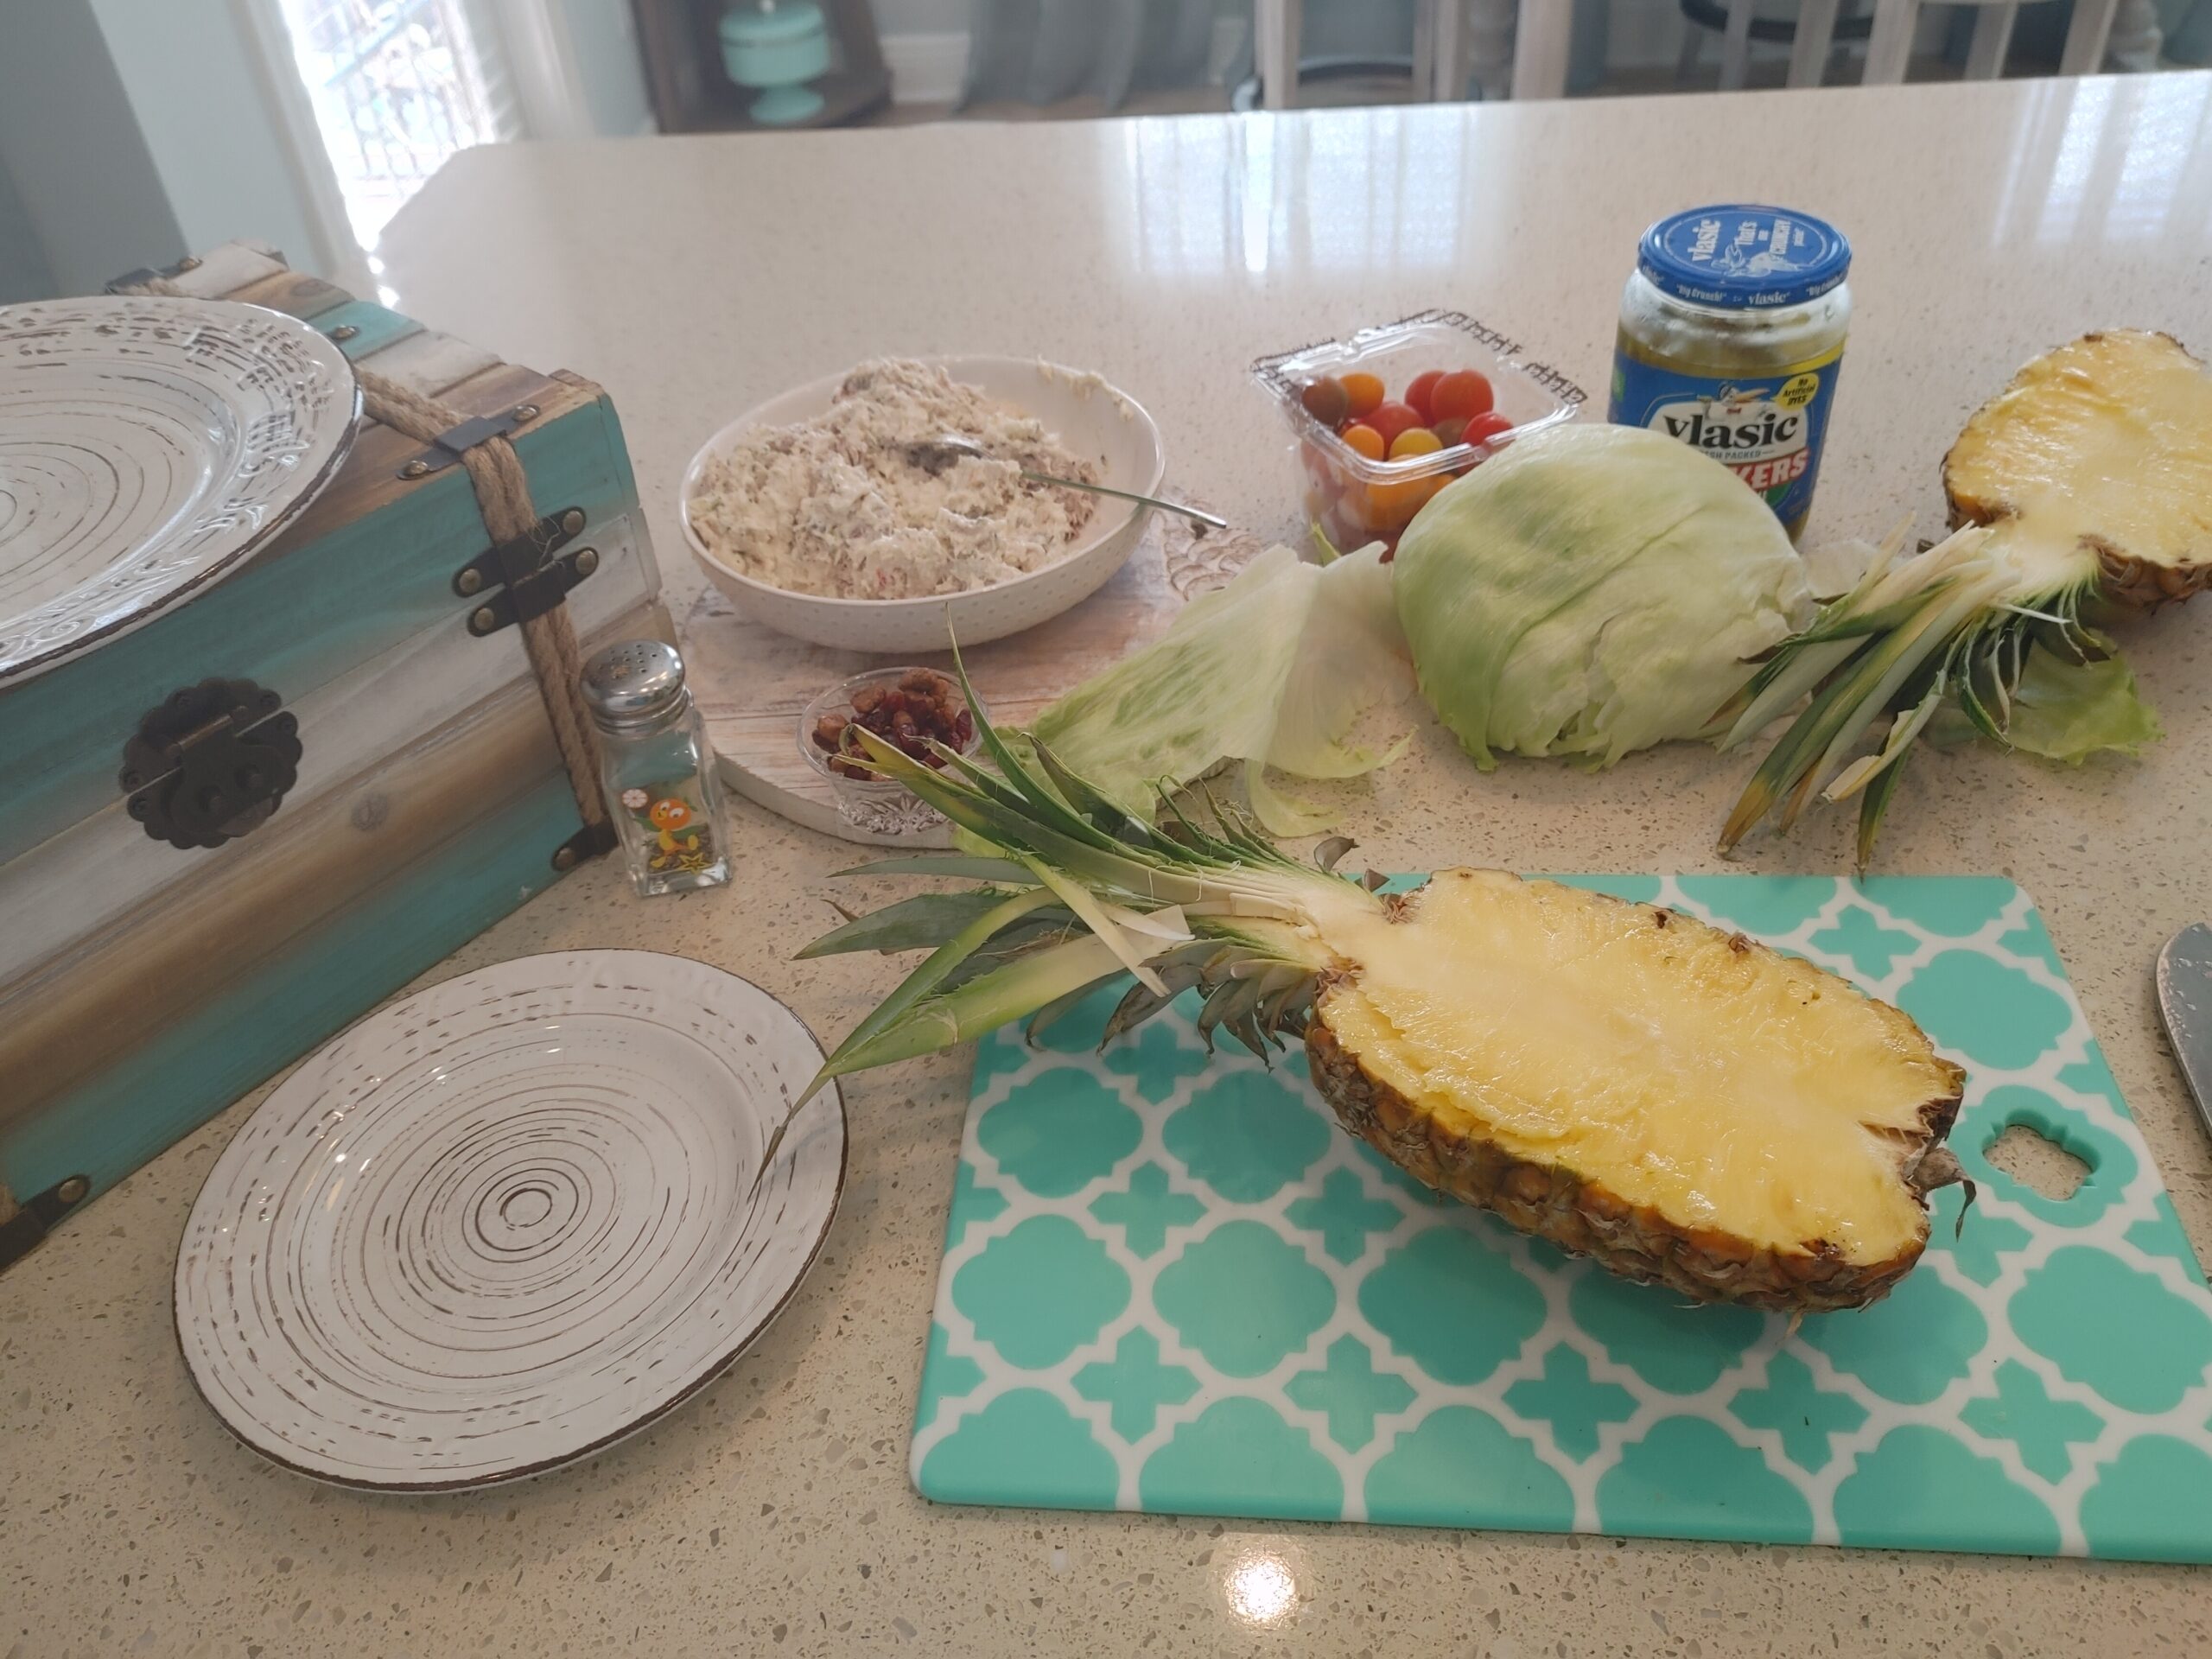 chicken salad in a pineapple